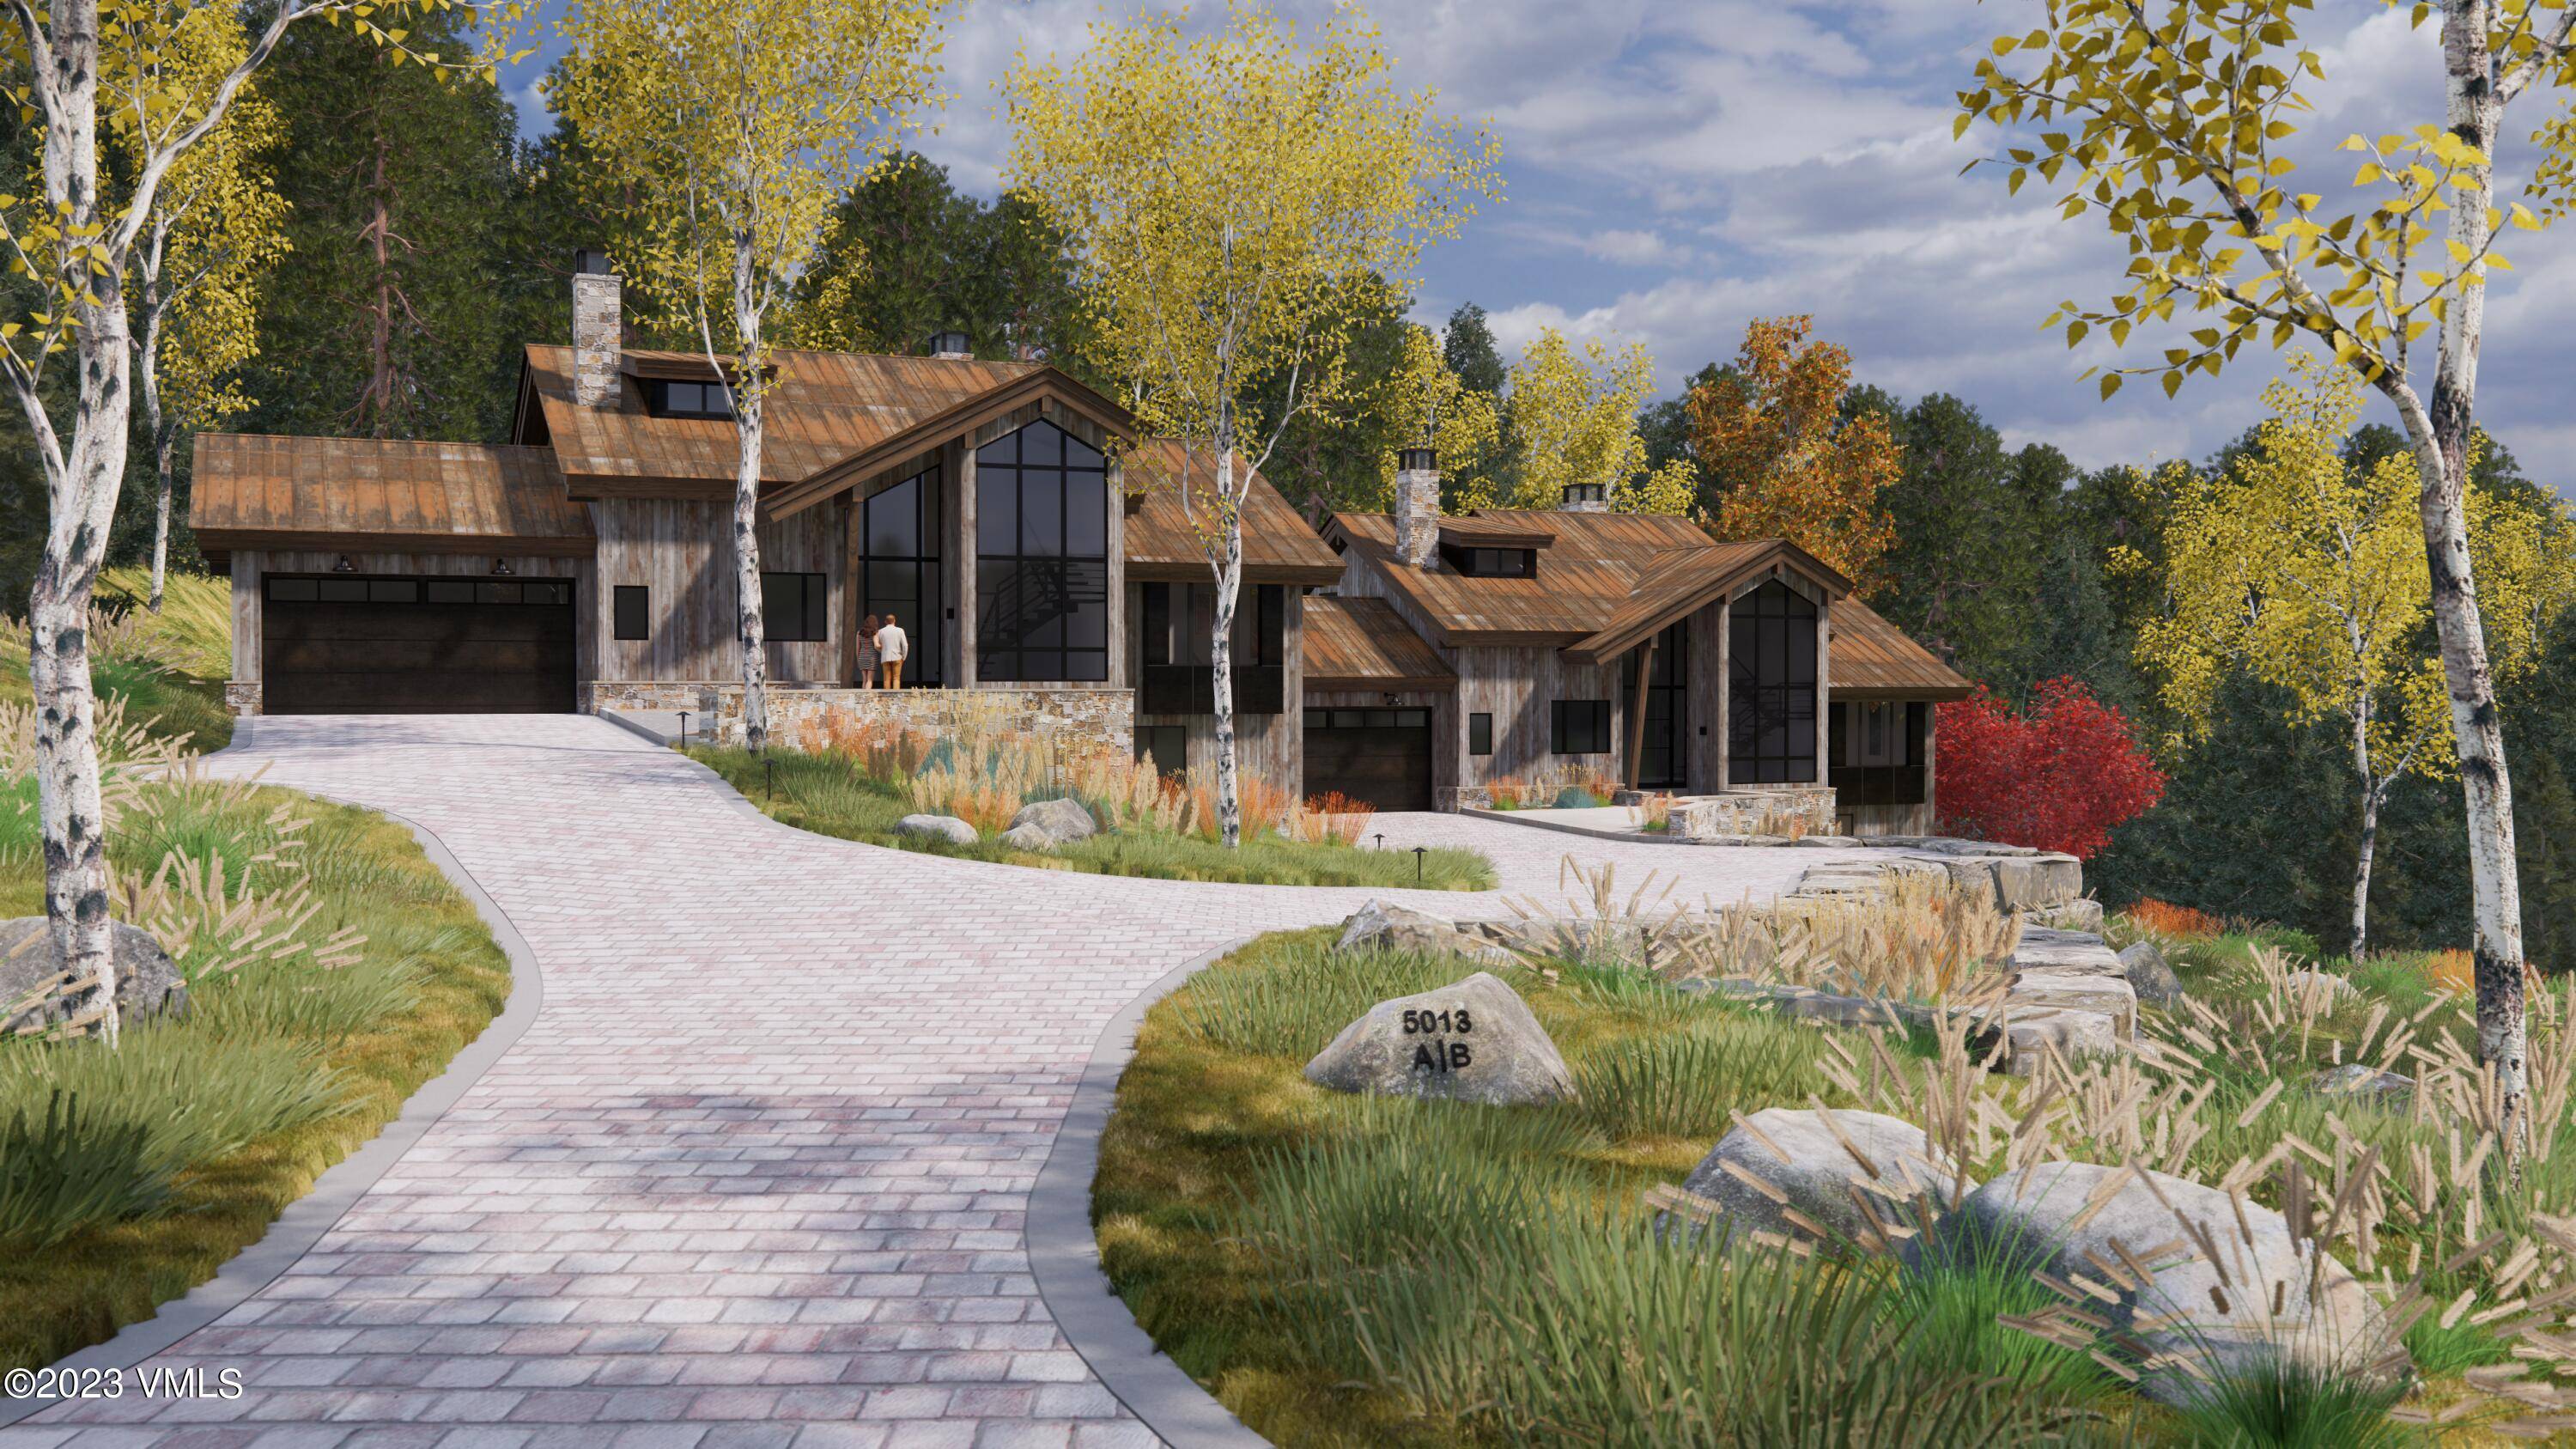 New mountain contemporary home under construction in a private alpine setting.